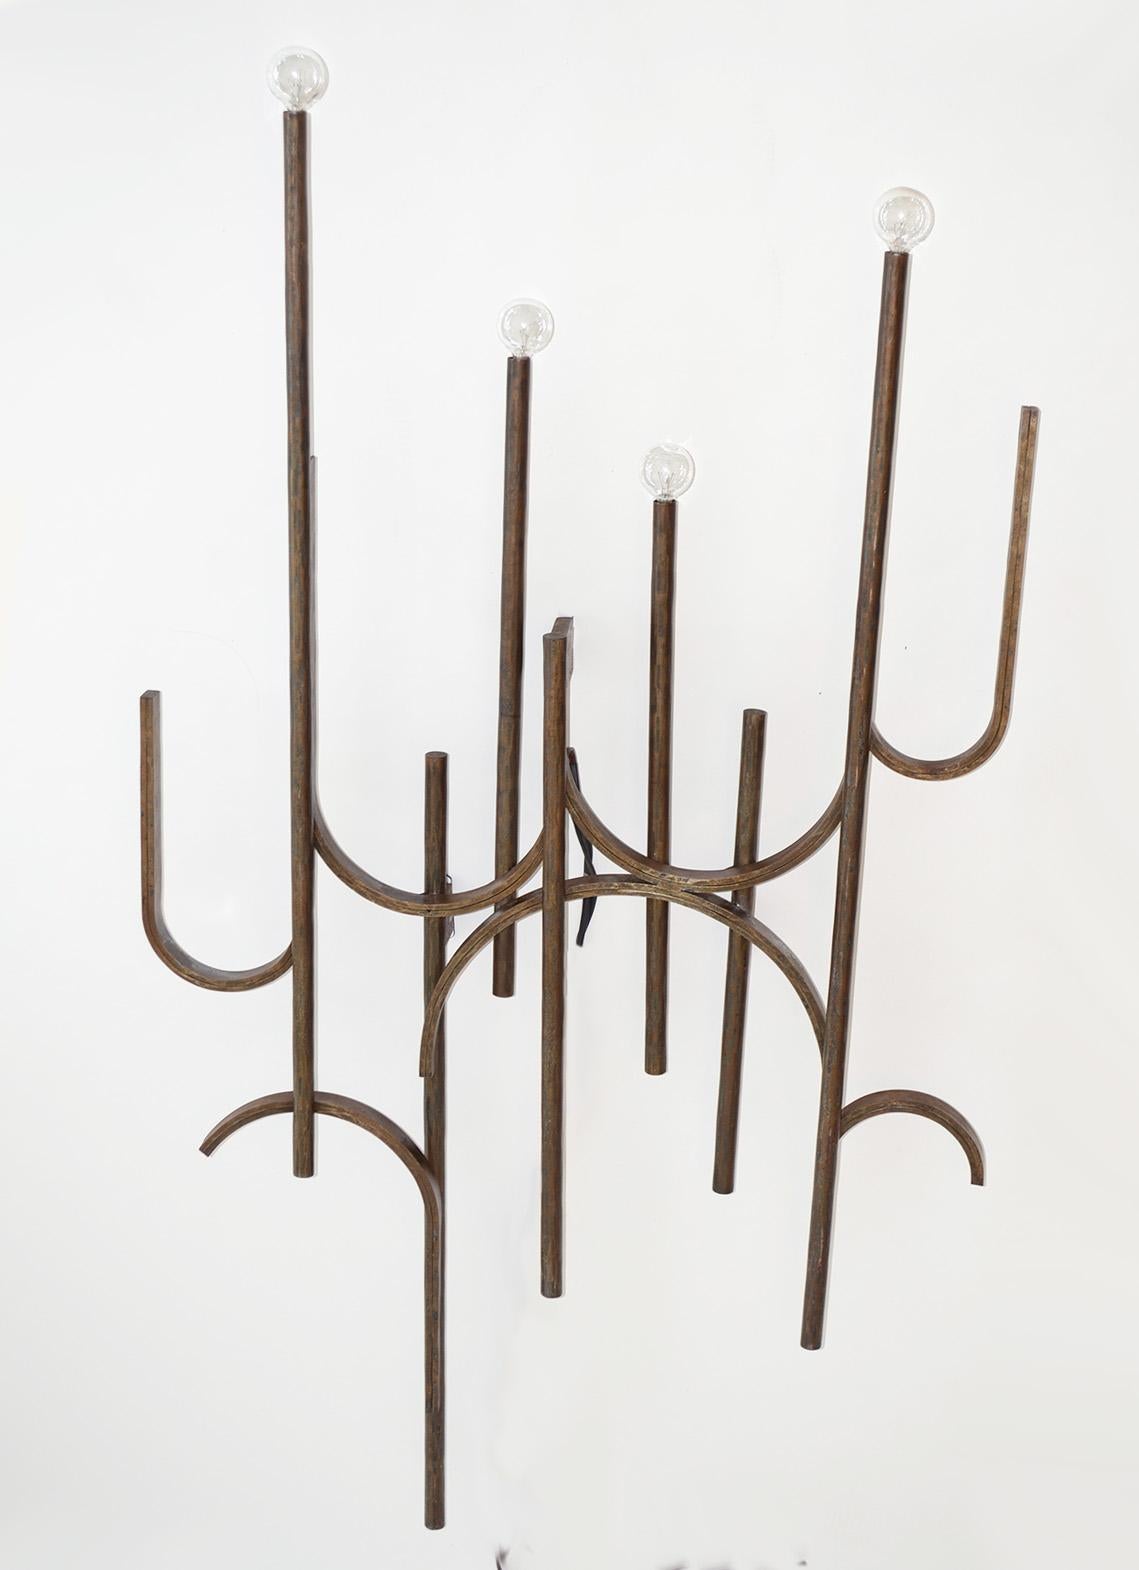 Pair of Wrought Iron Wall Sconces From a Miami Resort, Brutalist Deco MIMO In Good Condition For Sale In Ft Lauderdale, FL